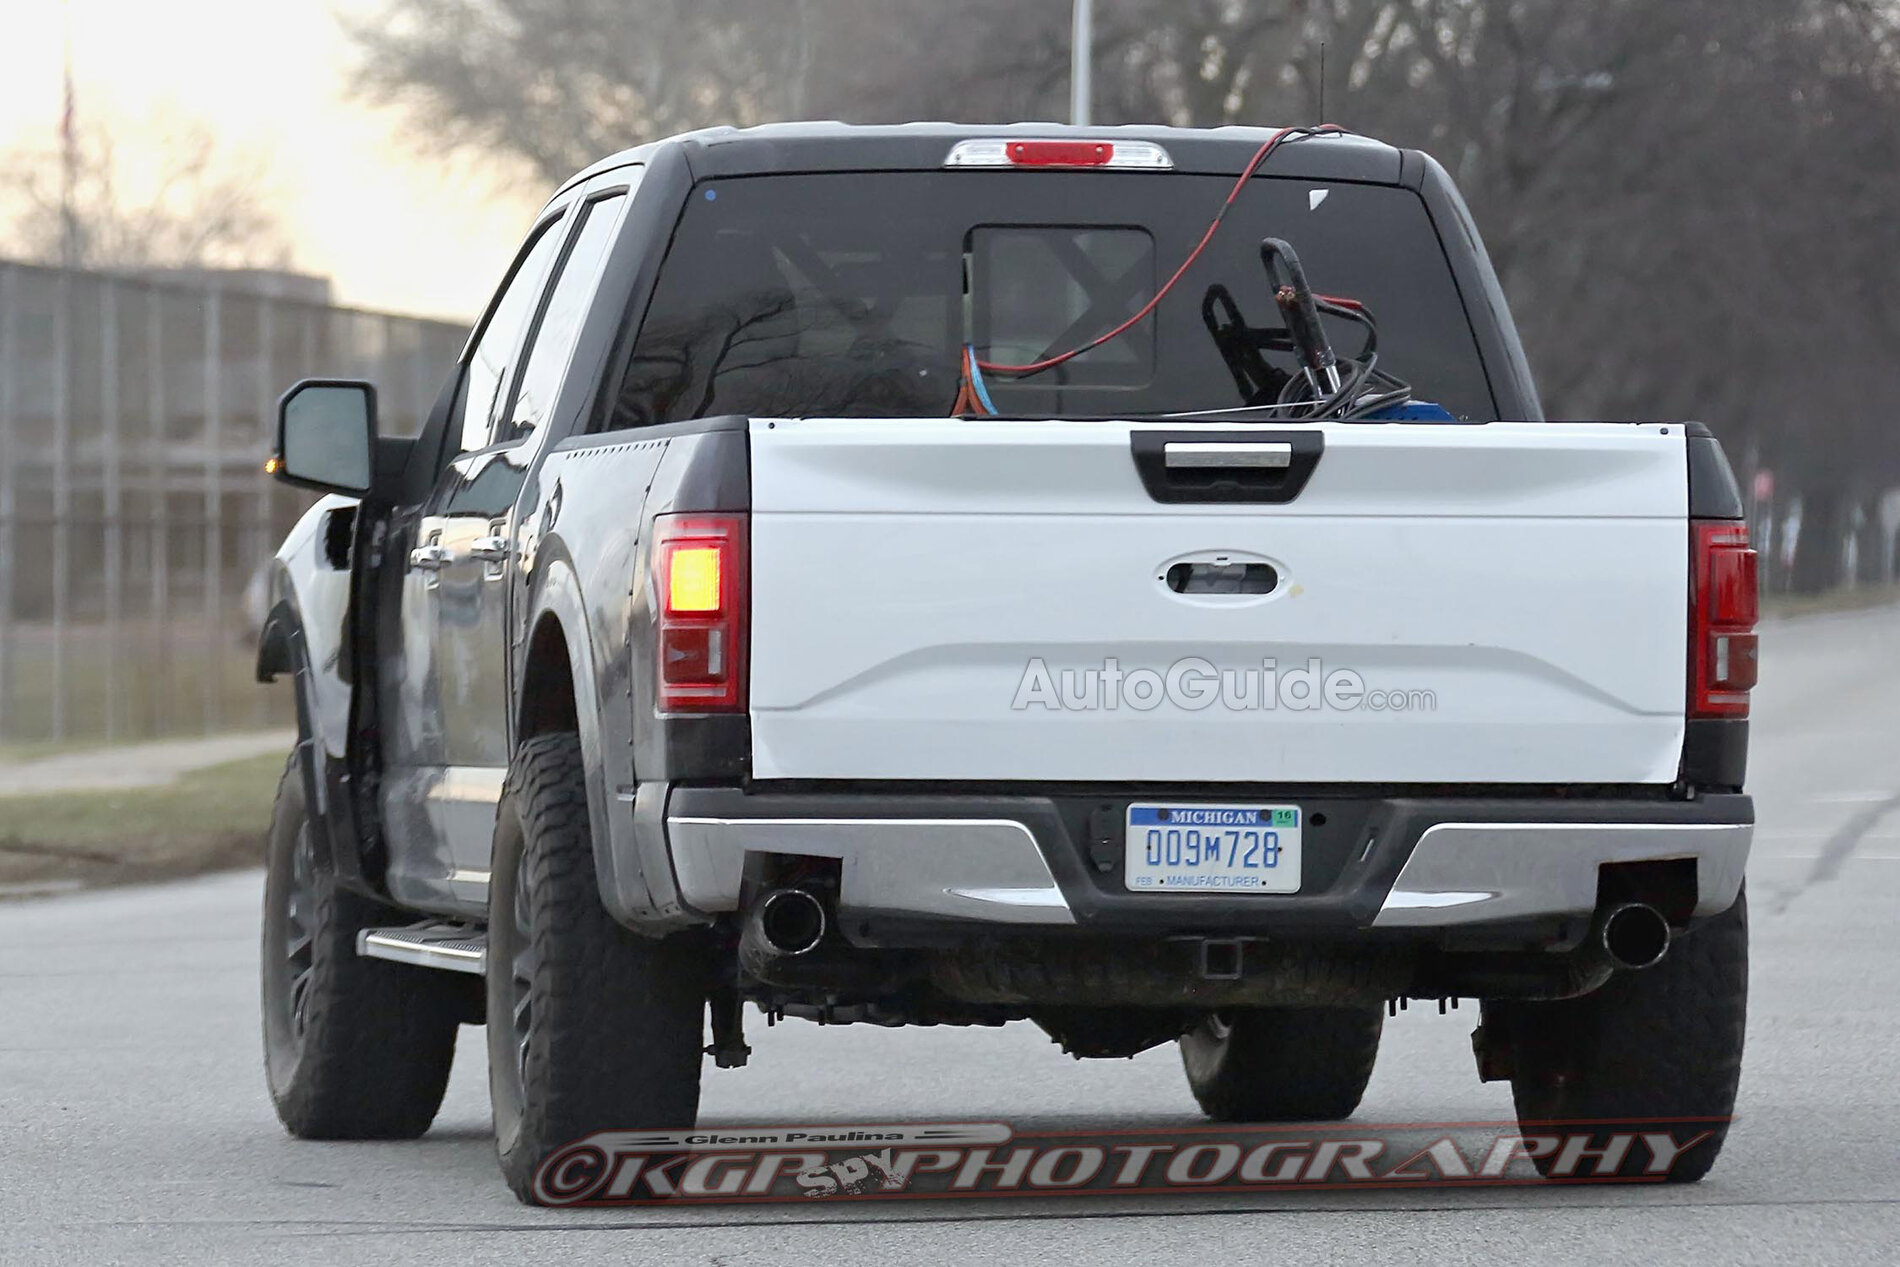 S650 Mustang S650 is out there somewhere, isn't she? Ford-F-150-Mule-Spy-Photo-6